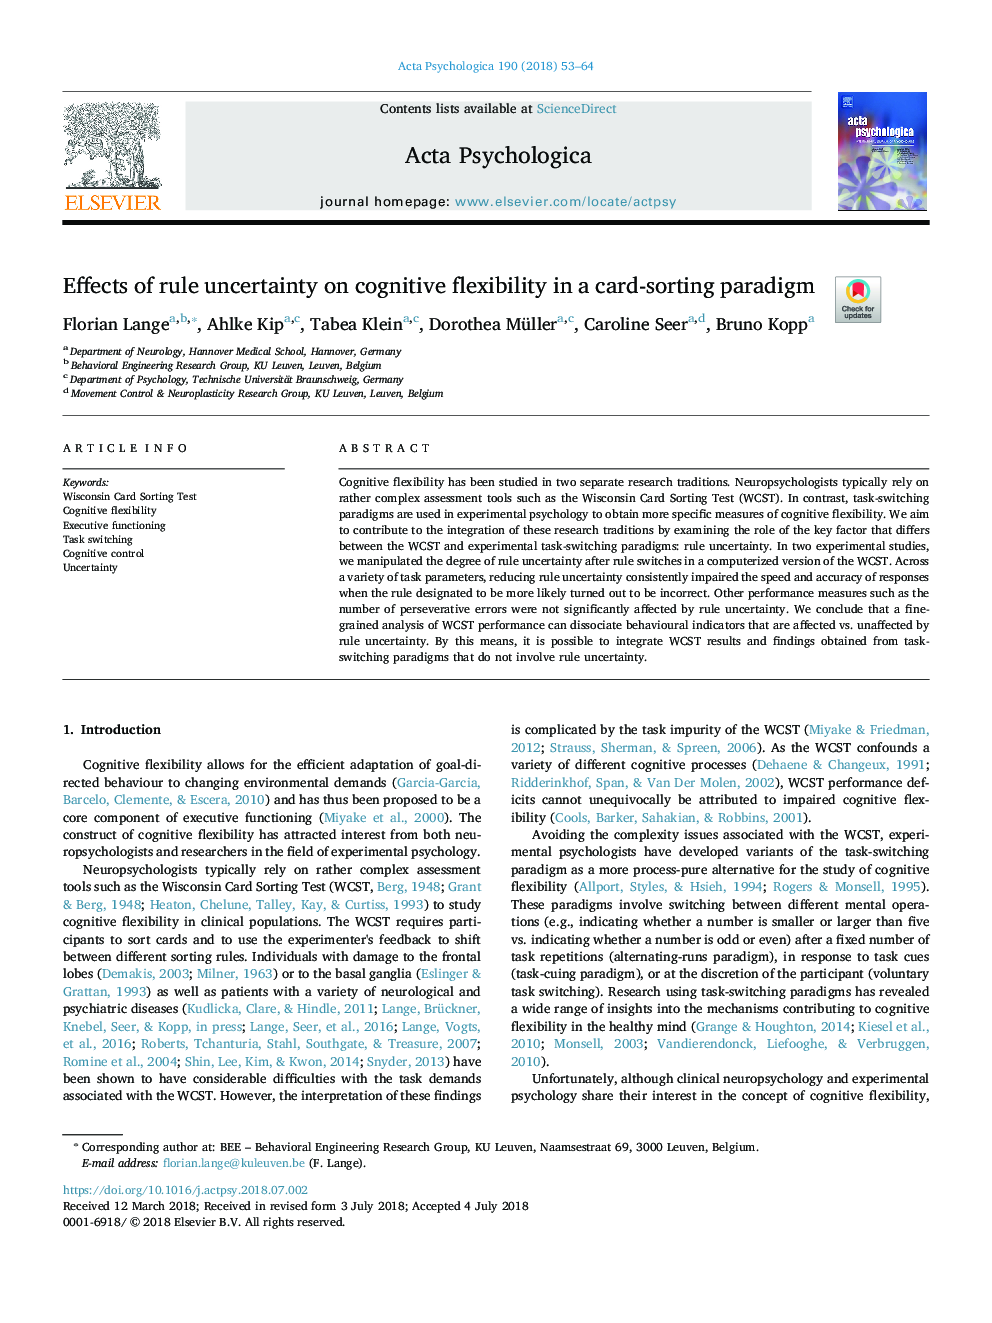 Effects of rule uncertainty on cognitive flexibility in a card-sorting paradigm